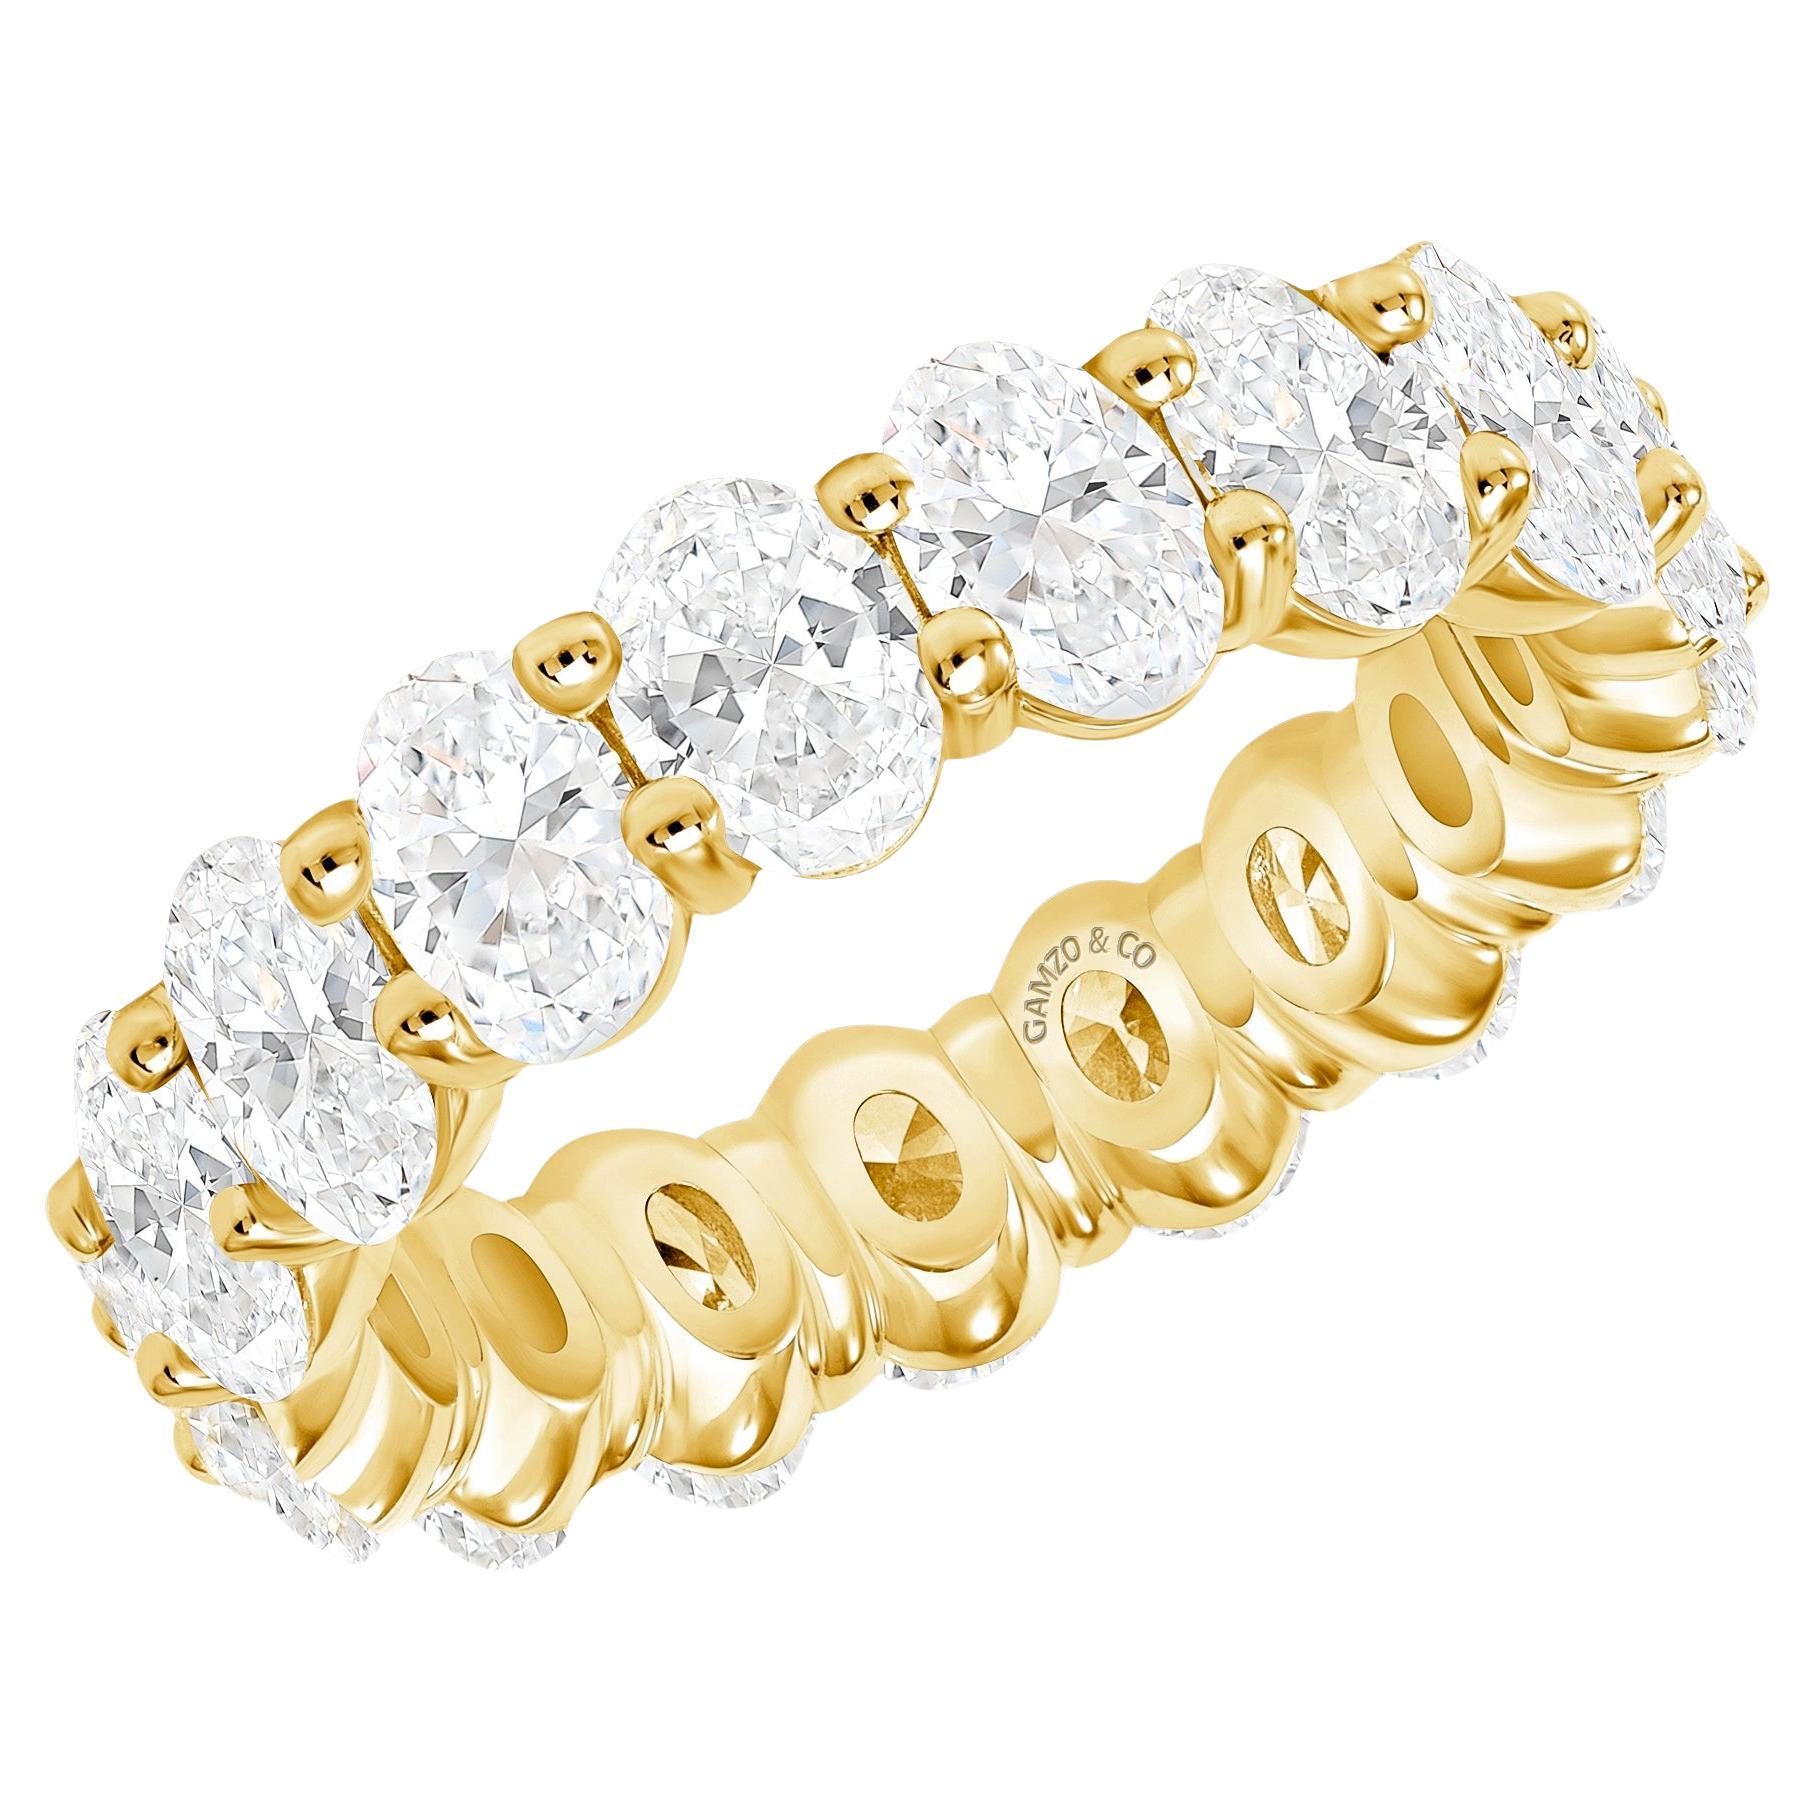 For Sale:  18k Yellow Gold 3 Carat Oval Cut Natural Diamond Eternity Ring